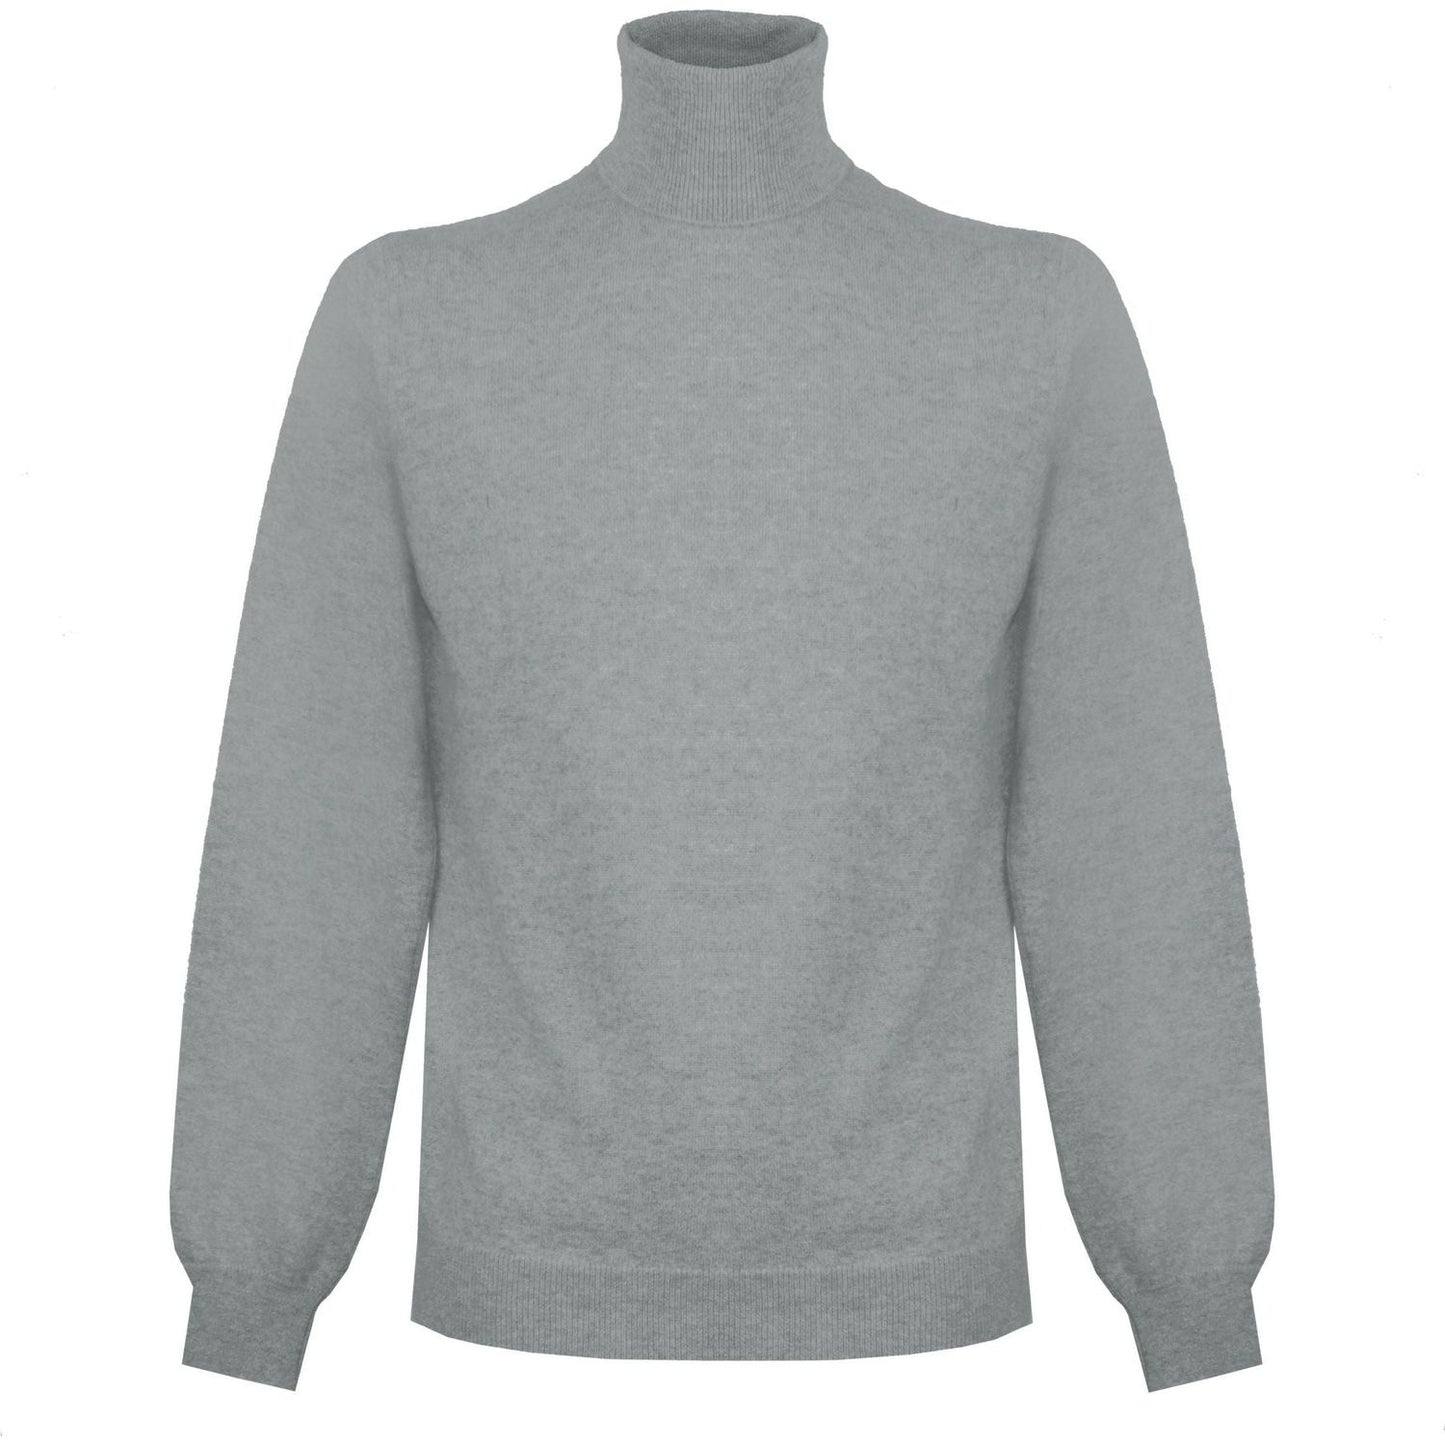 Malo Elevated Cashmere High Neck Sweater gray-cashmere-sweater-3 MAN SWEATERS product-7510-1303680789-48-scaled-aebe2be1-2cb.jpg